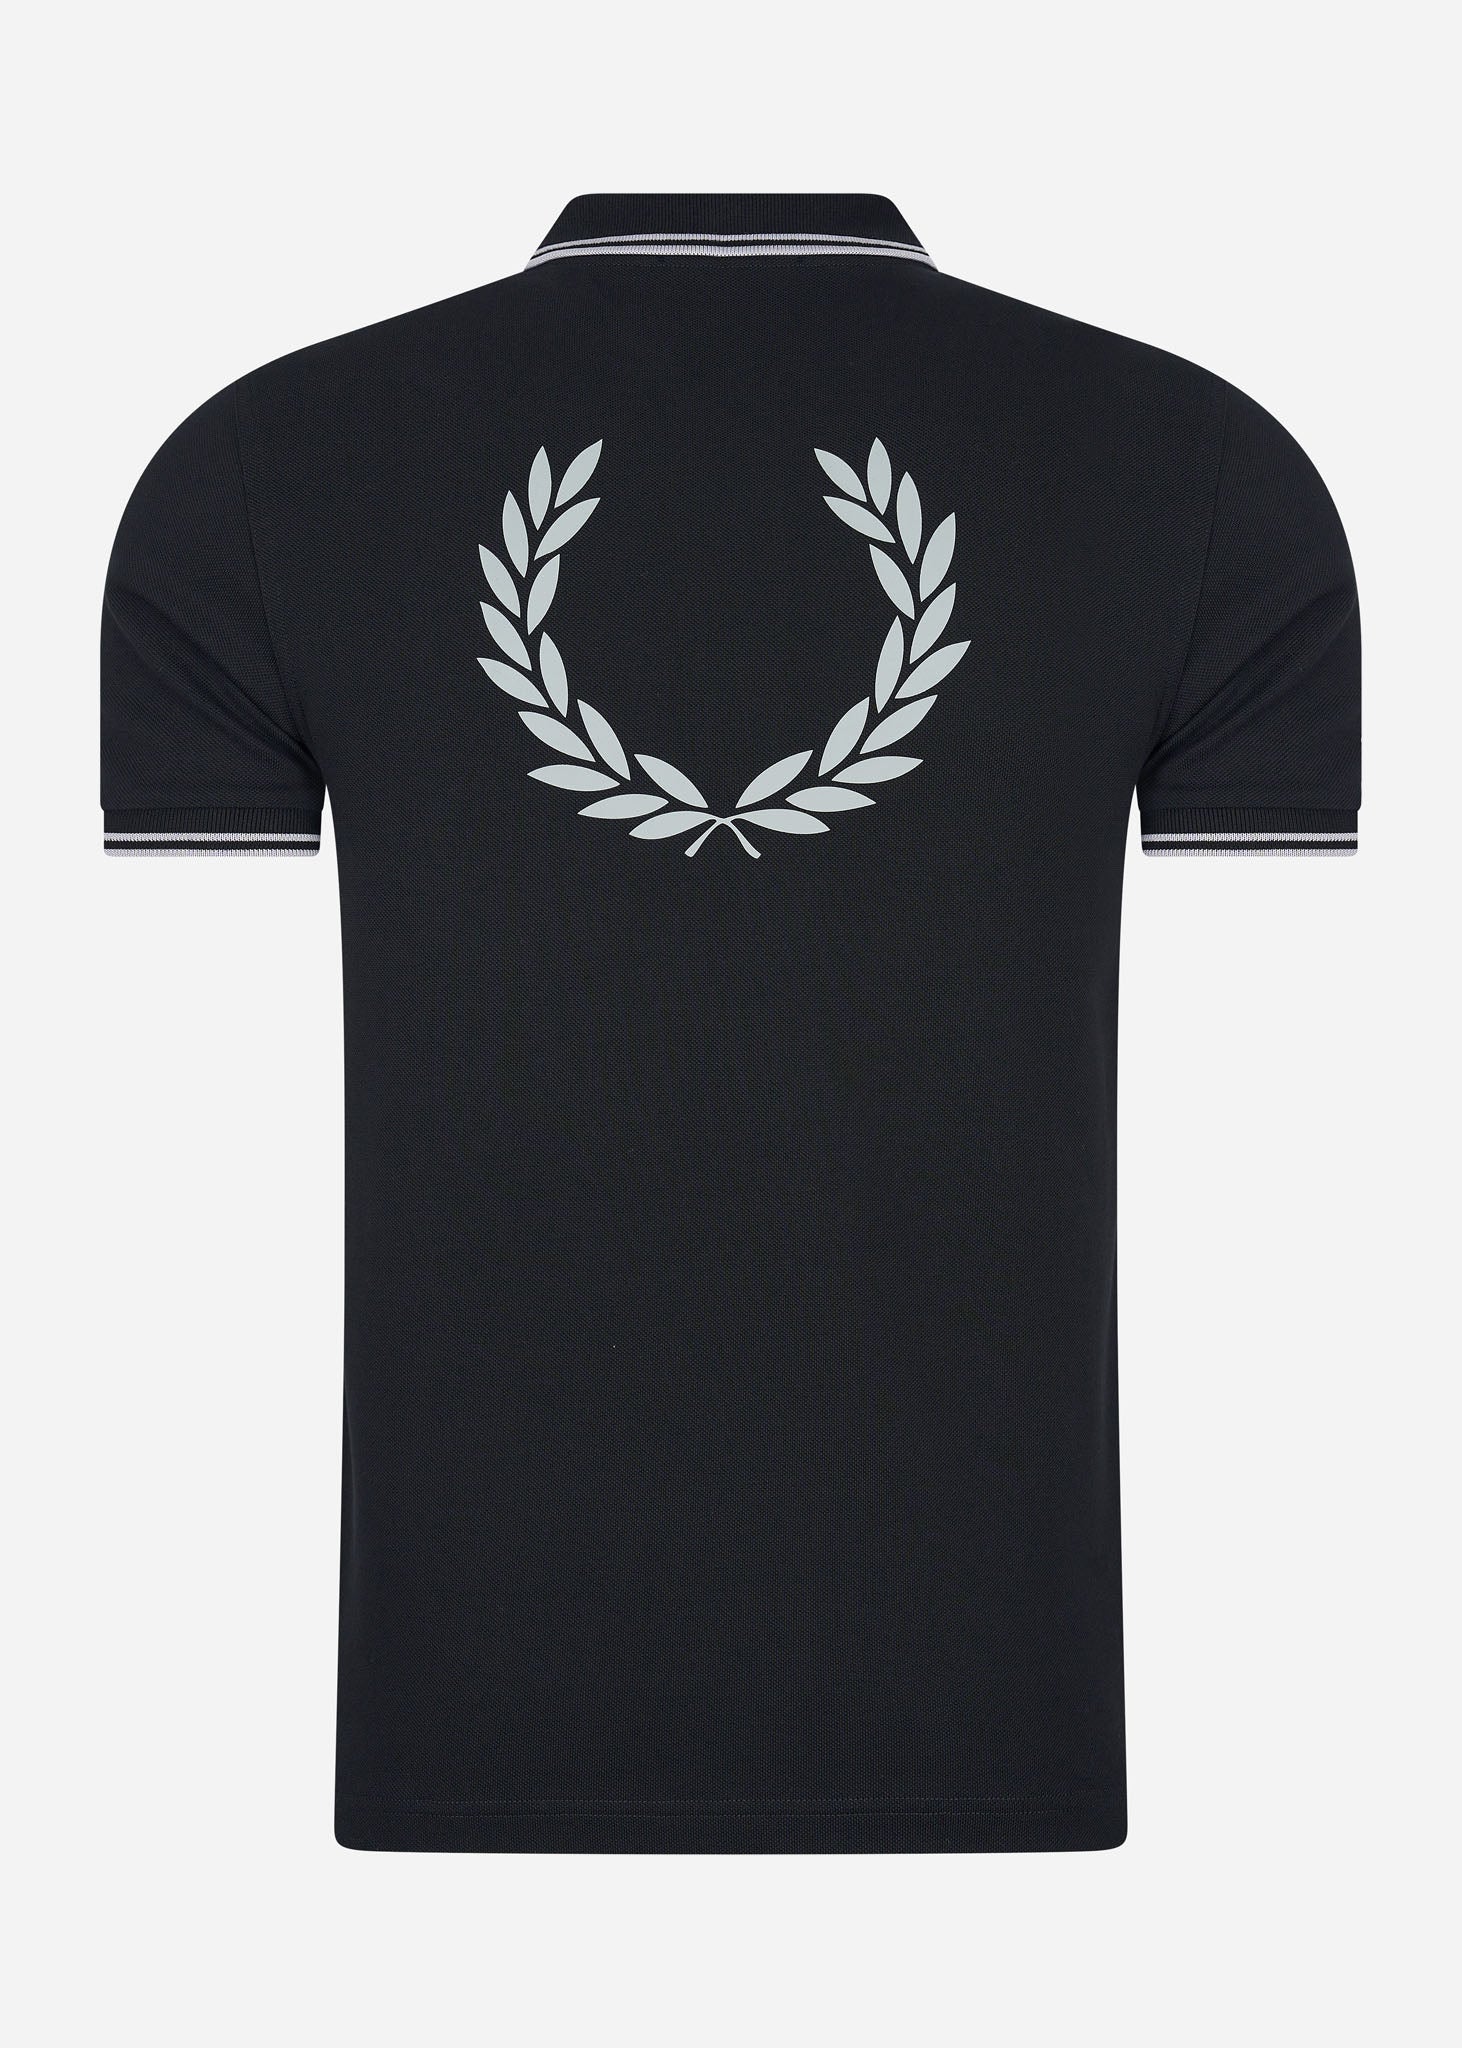 Fred Perry Polo's  Back graphic polo shirt - black 